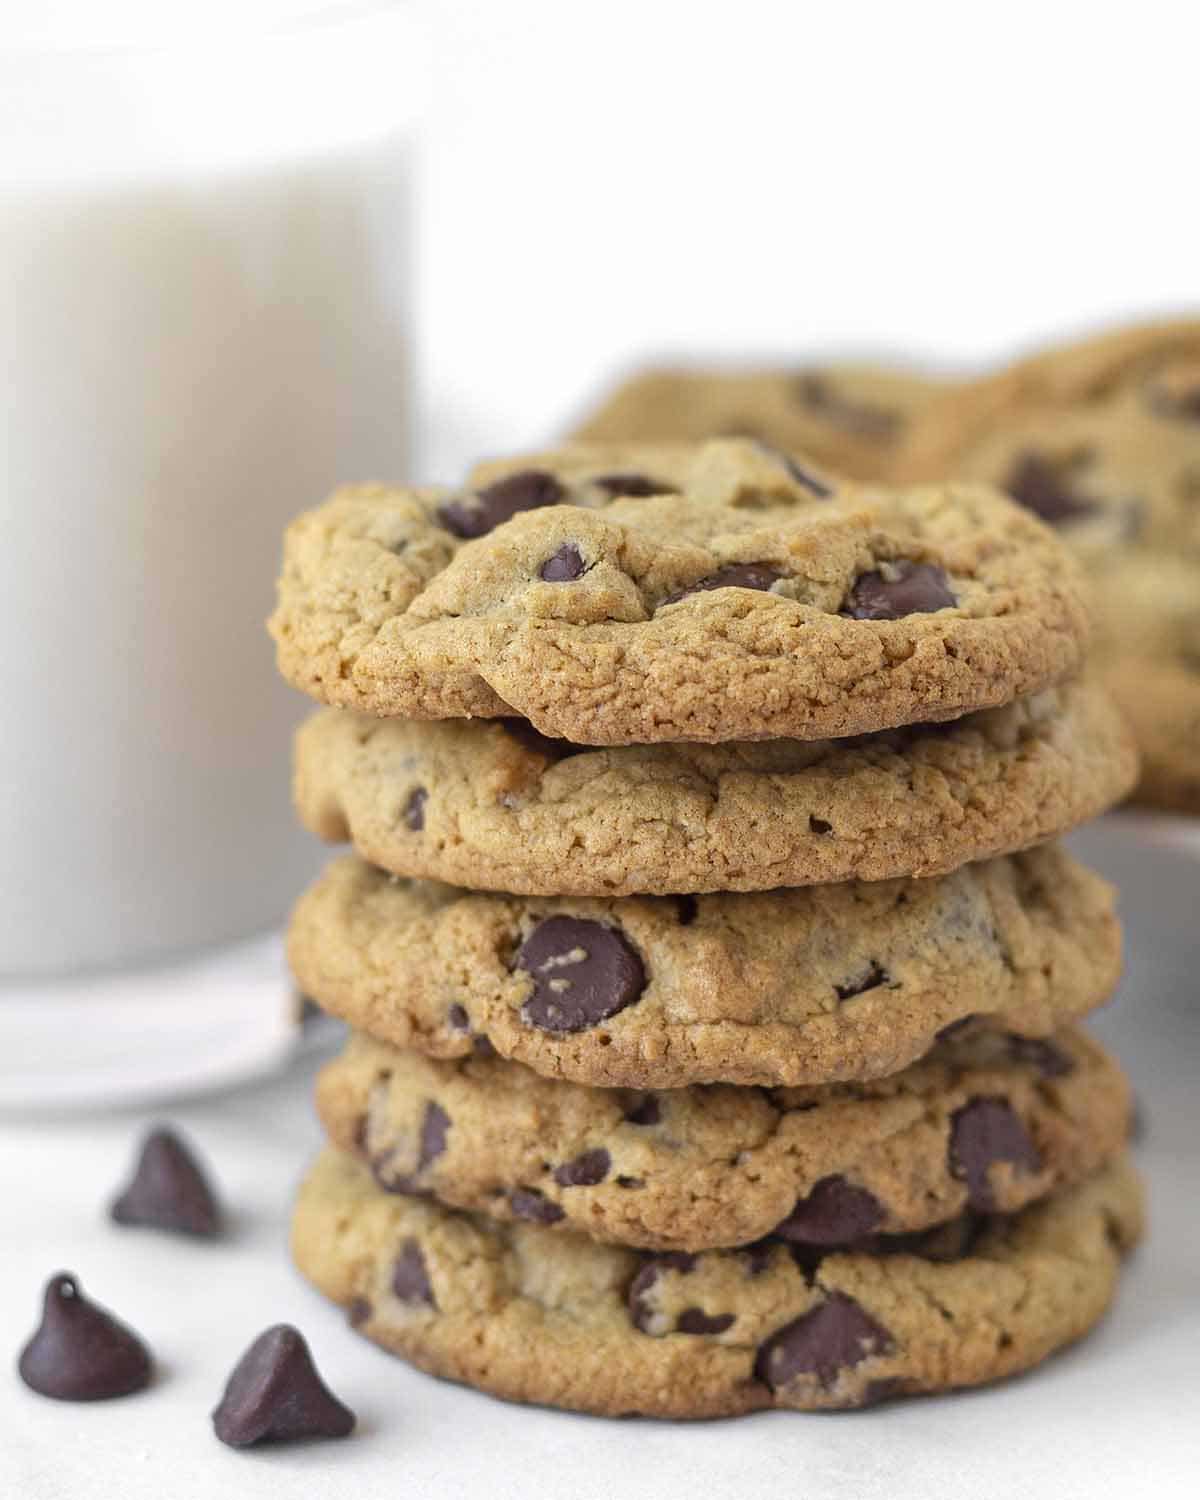 A stack of five oat flour cookies, a glass of milk and more cookies can be seen behind the stack.